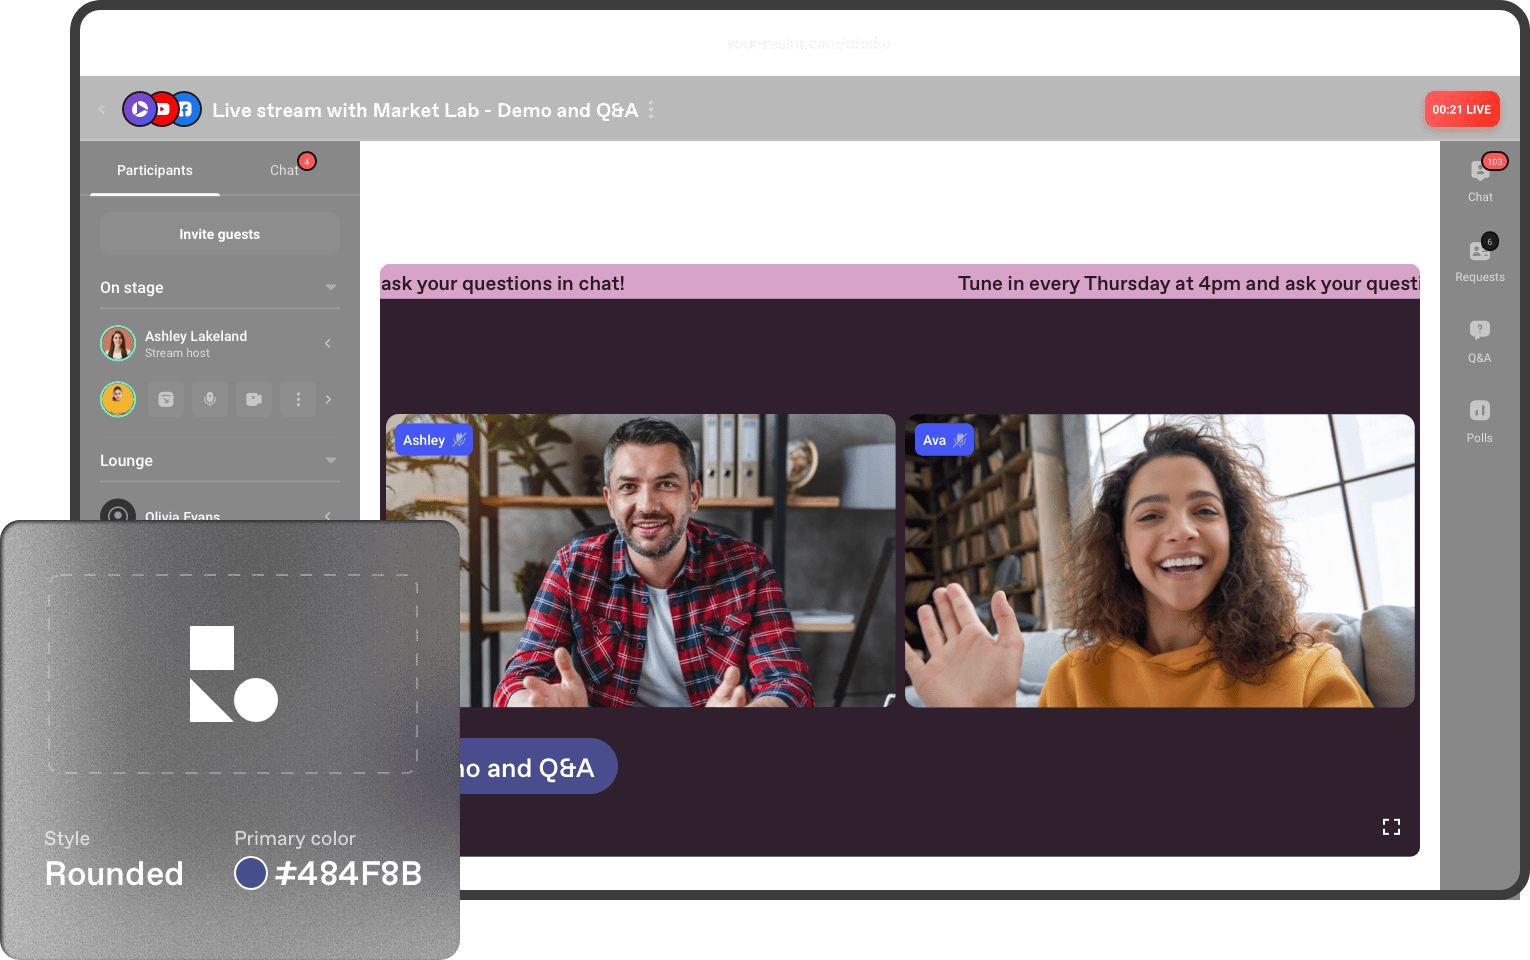 Live stream host customizing the look of the broadcast and managing participants on stream.